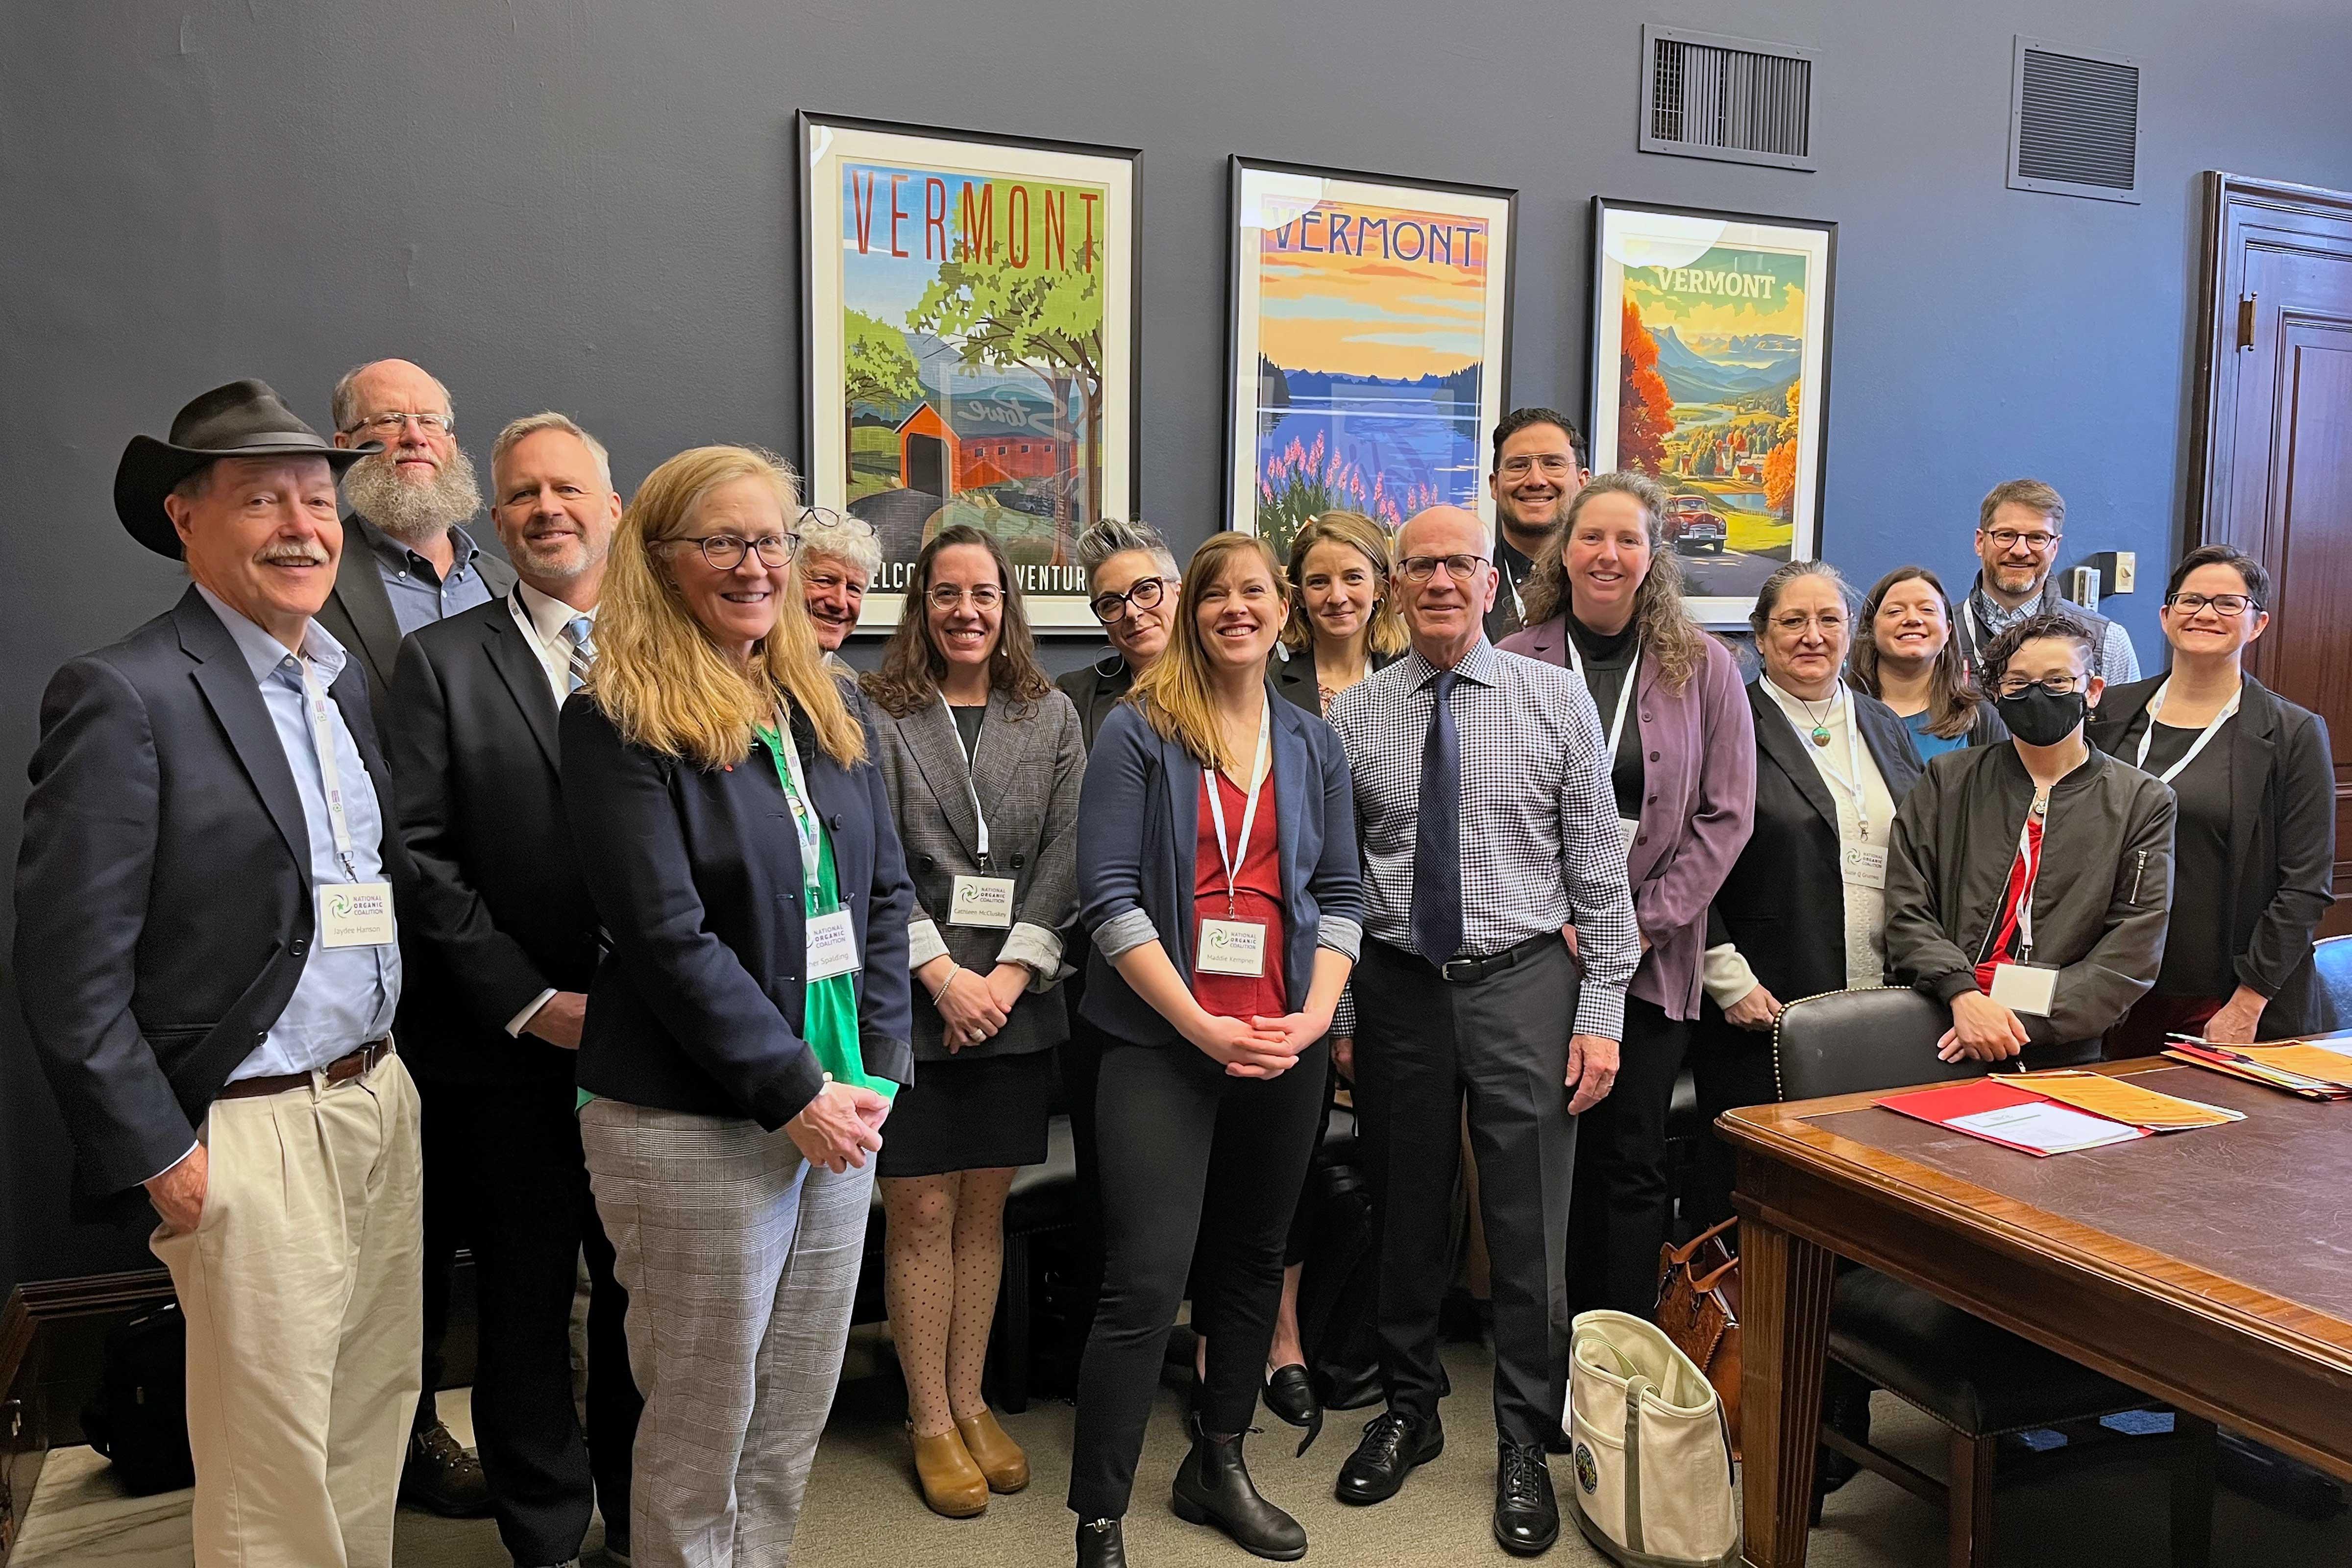 NOFA-VT Policy Director Maddie Kempner pictured with Senator Welch and other members of the National Organic Coalition during a recent advocacy visit to Captiol Hill